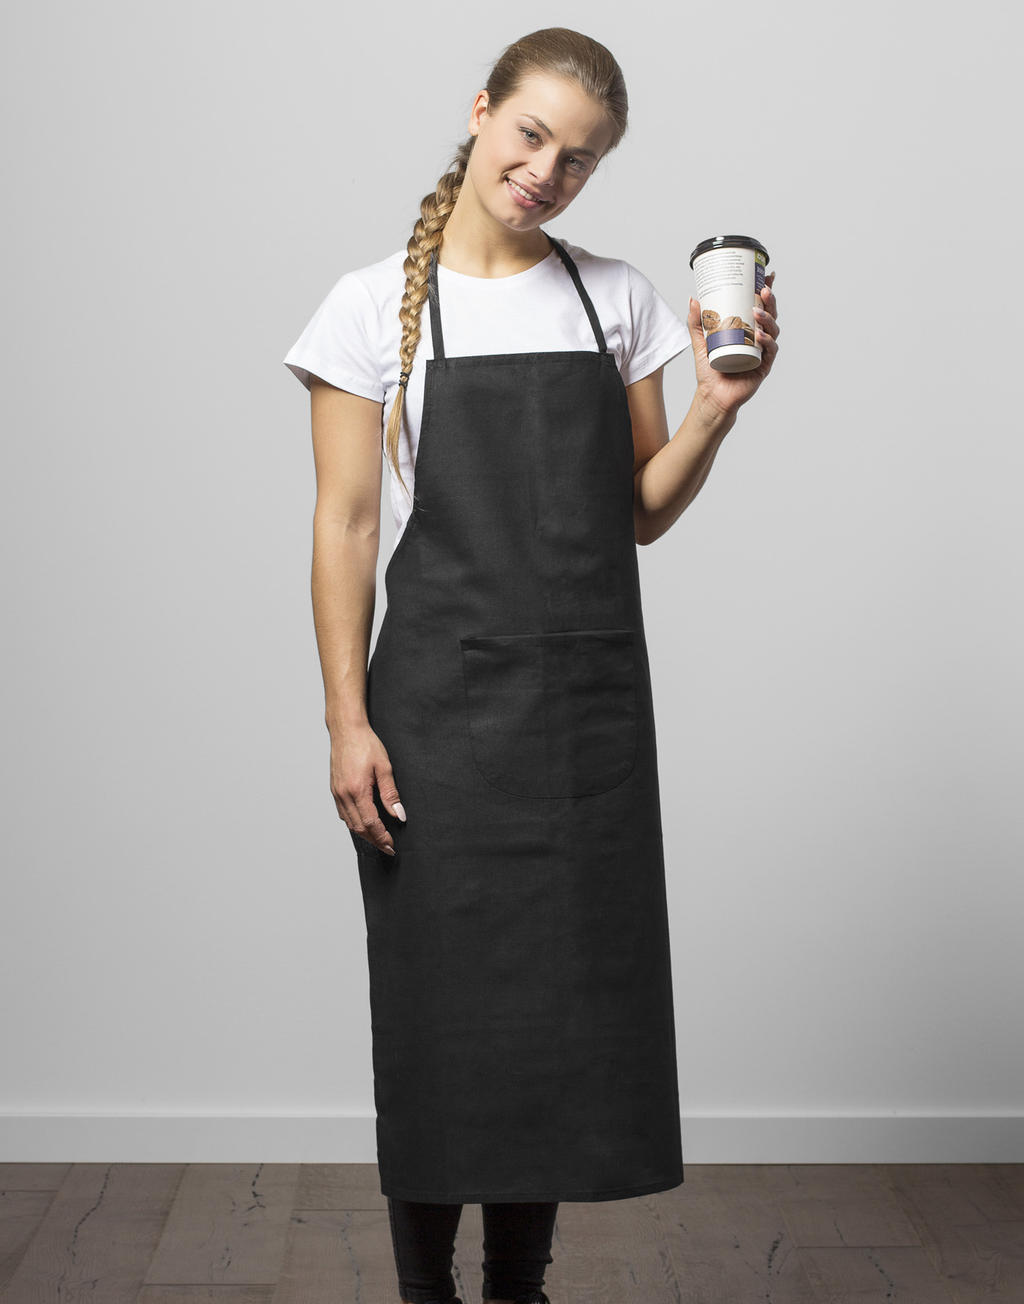  Budapest Festival Apron with Pocket in Farbe White